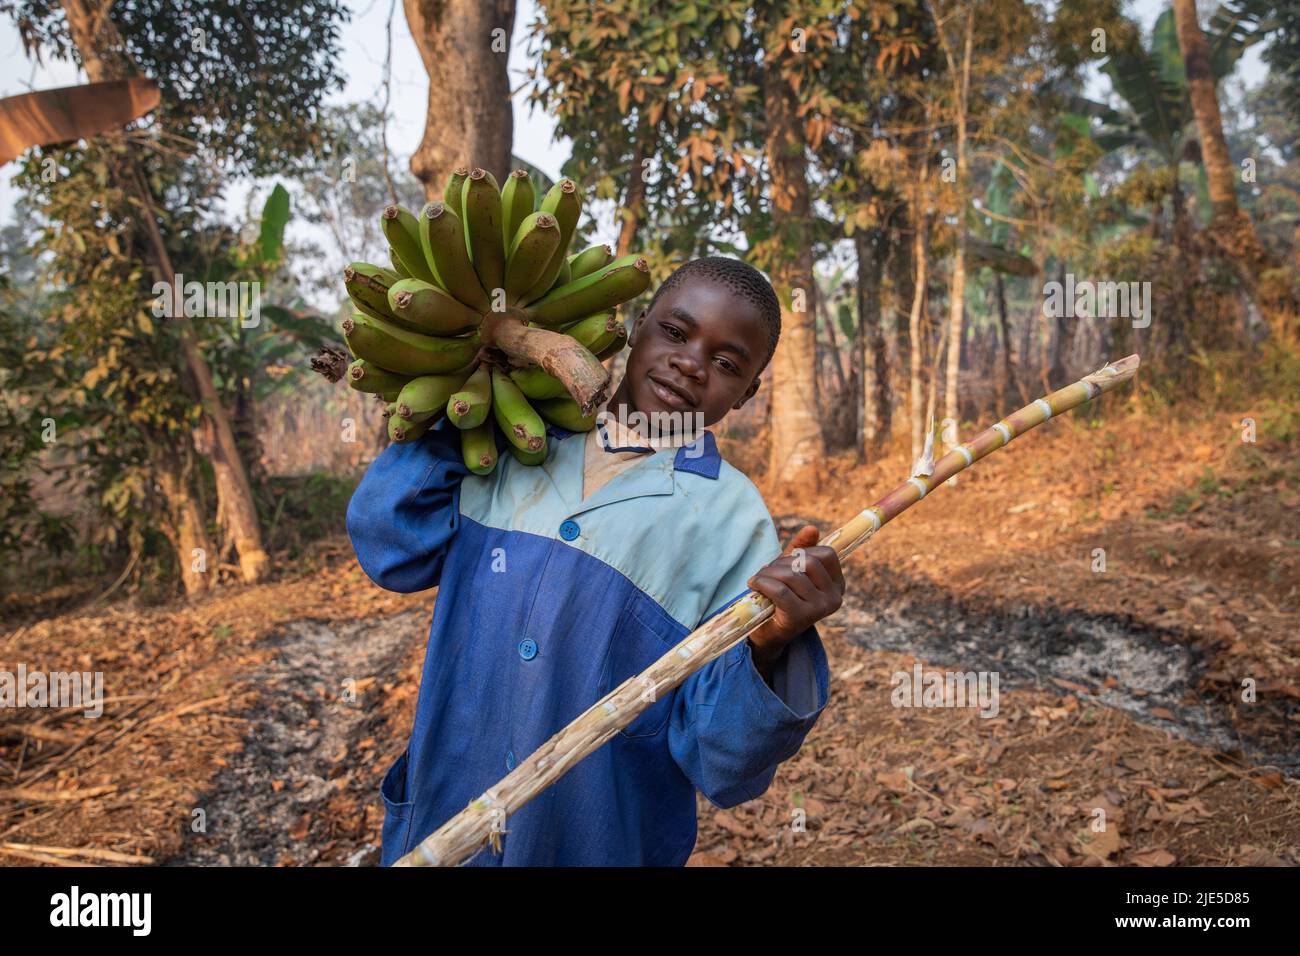 young child works in the fields and has collected a bunch of banana plantains in africa, child labor concept Stock Photo